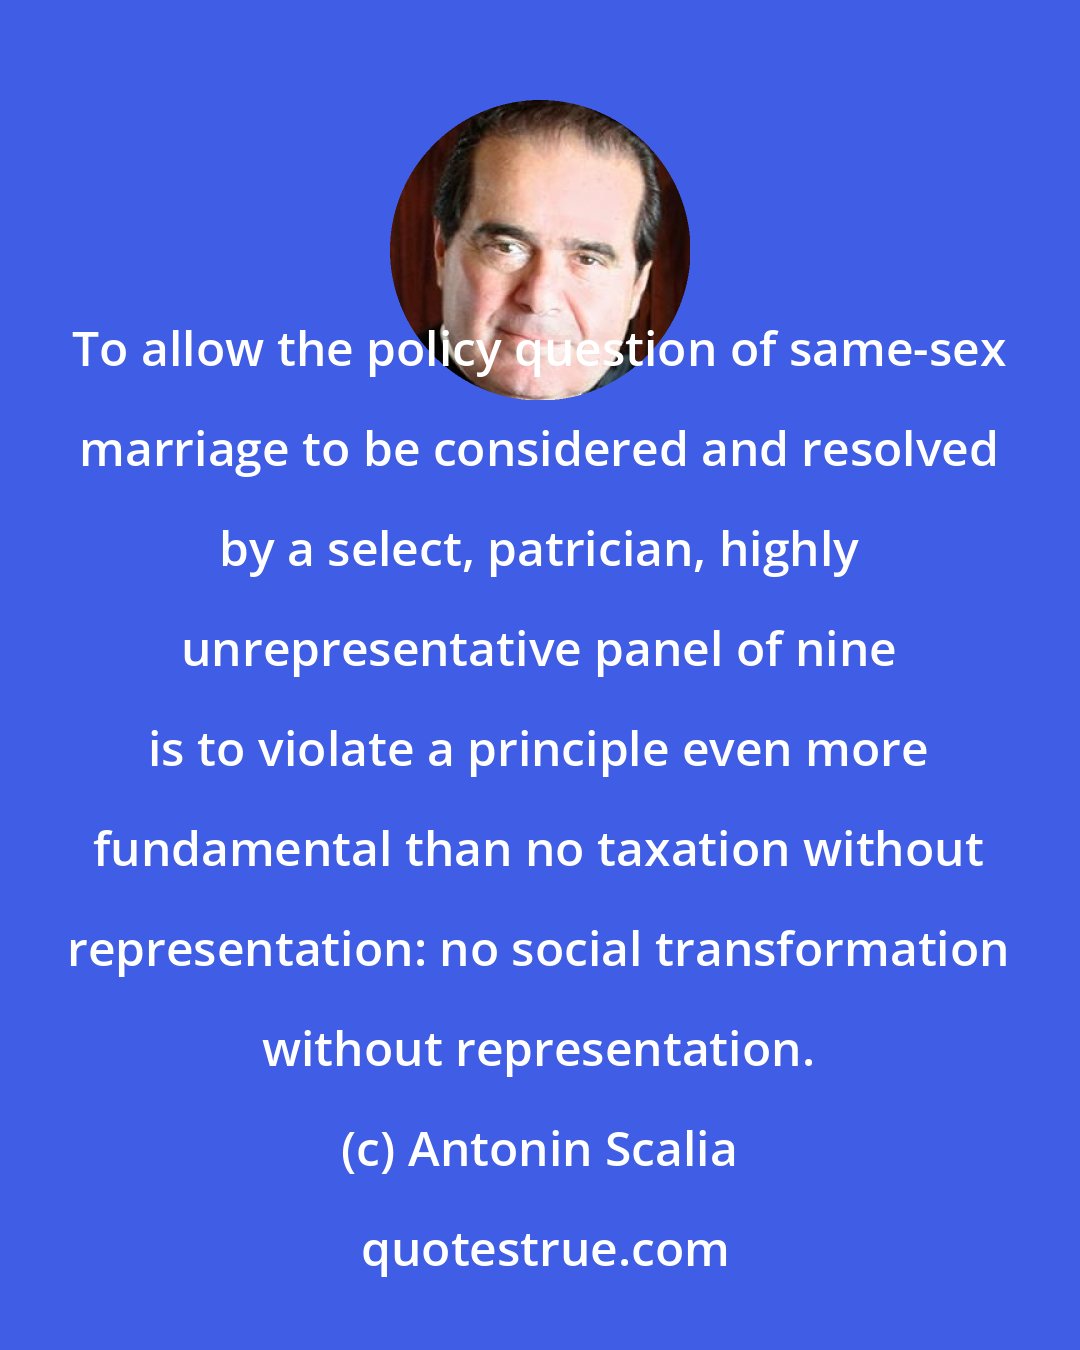 Antonin Scalia: To allow the policy question of same-sex marriage to be considered and resolved by a select, patrician, highly unrepresentative panel of nine is to violate a principle even more fundamental than no taxation without representation: no social transformation without representation.